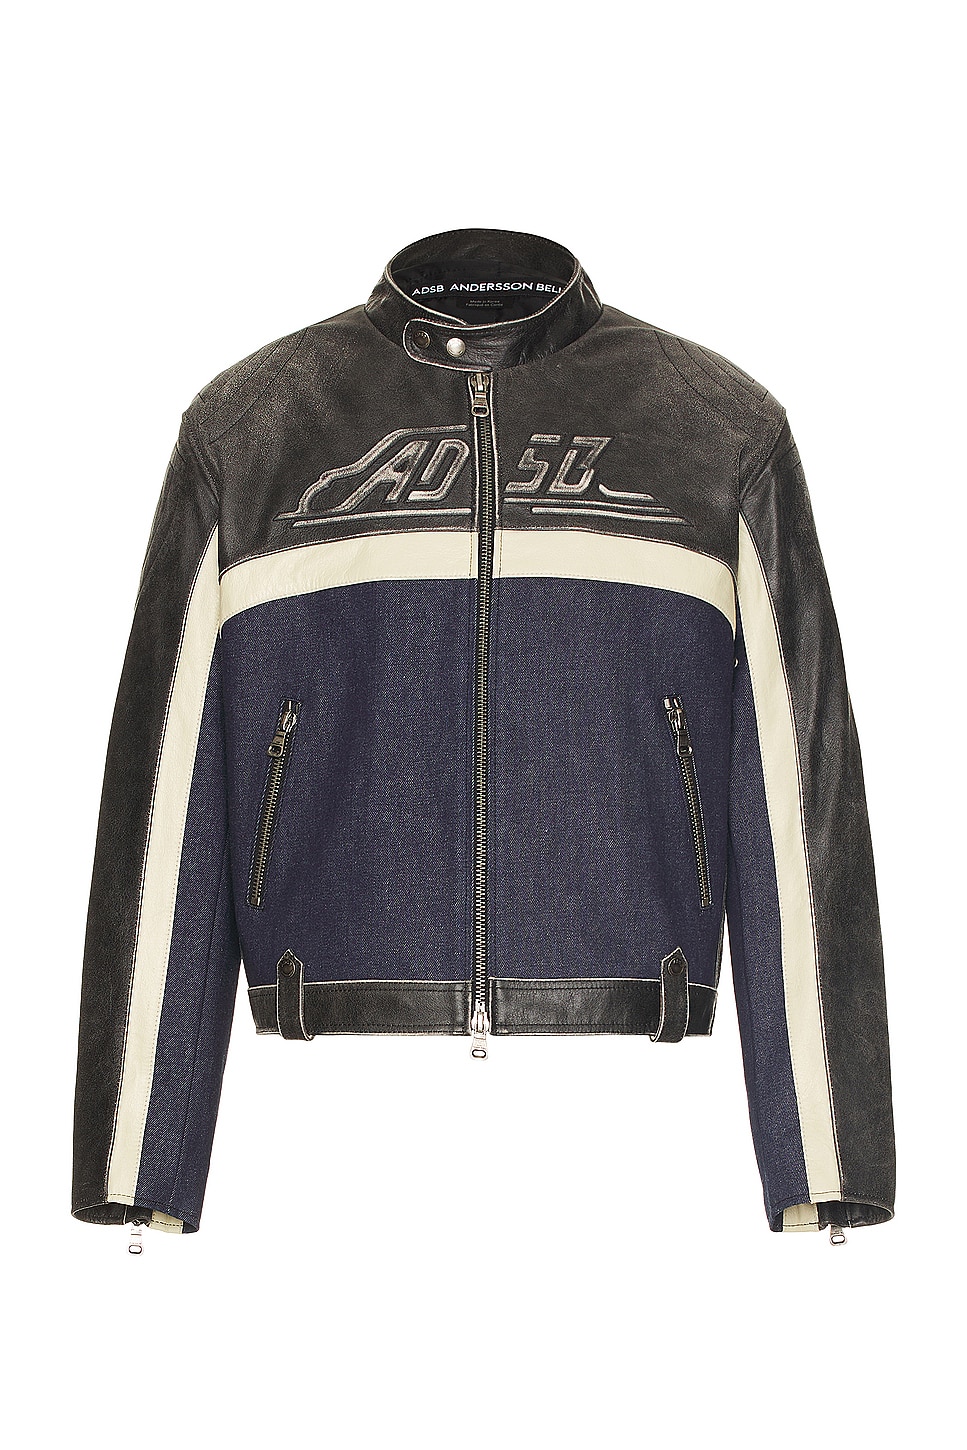 Image 1 of Andersson Bell 24 Racing Leather Jacket in Black